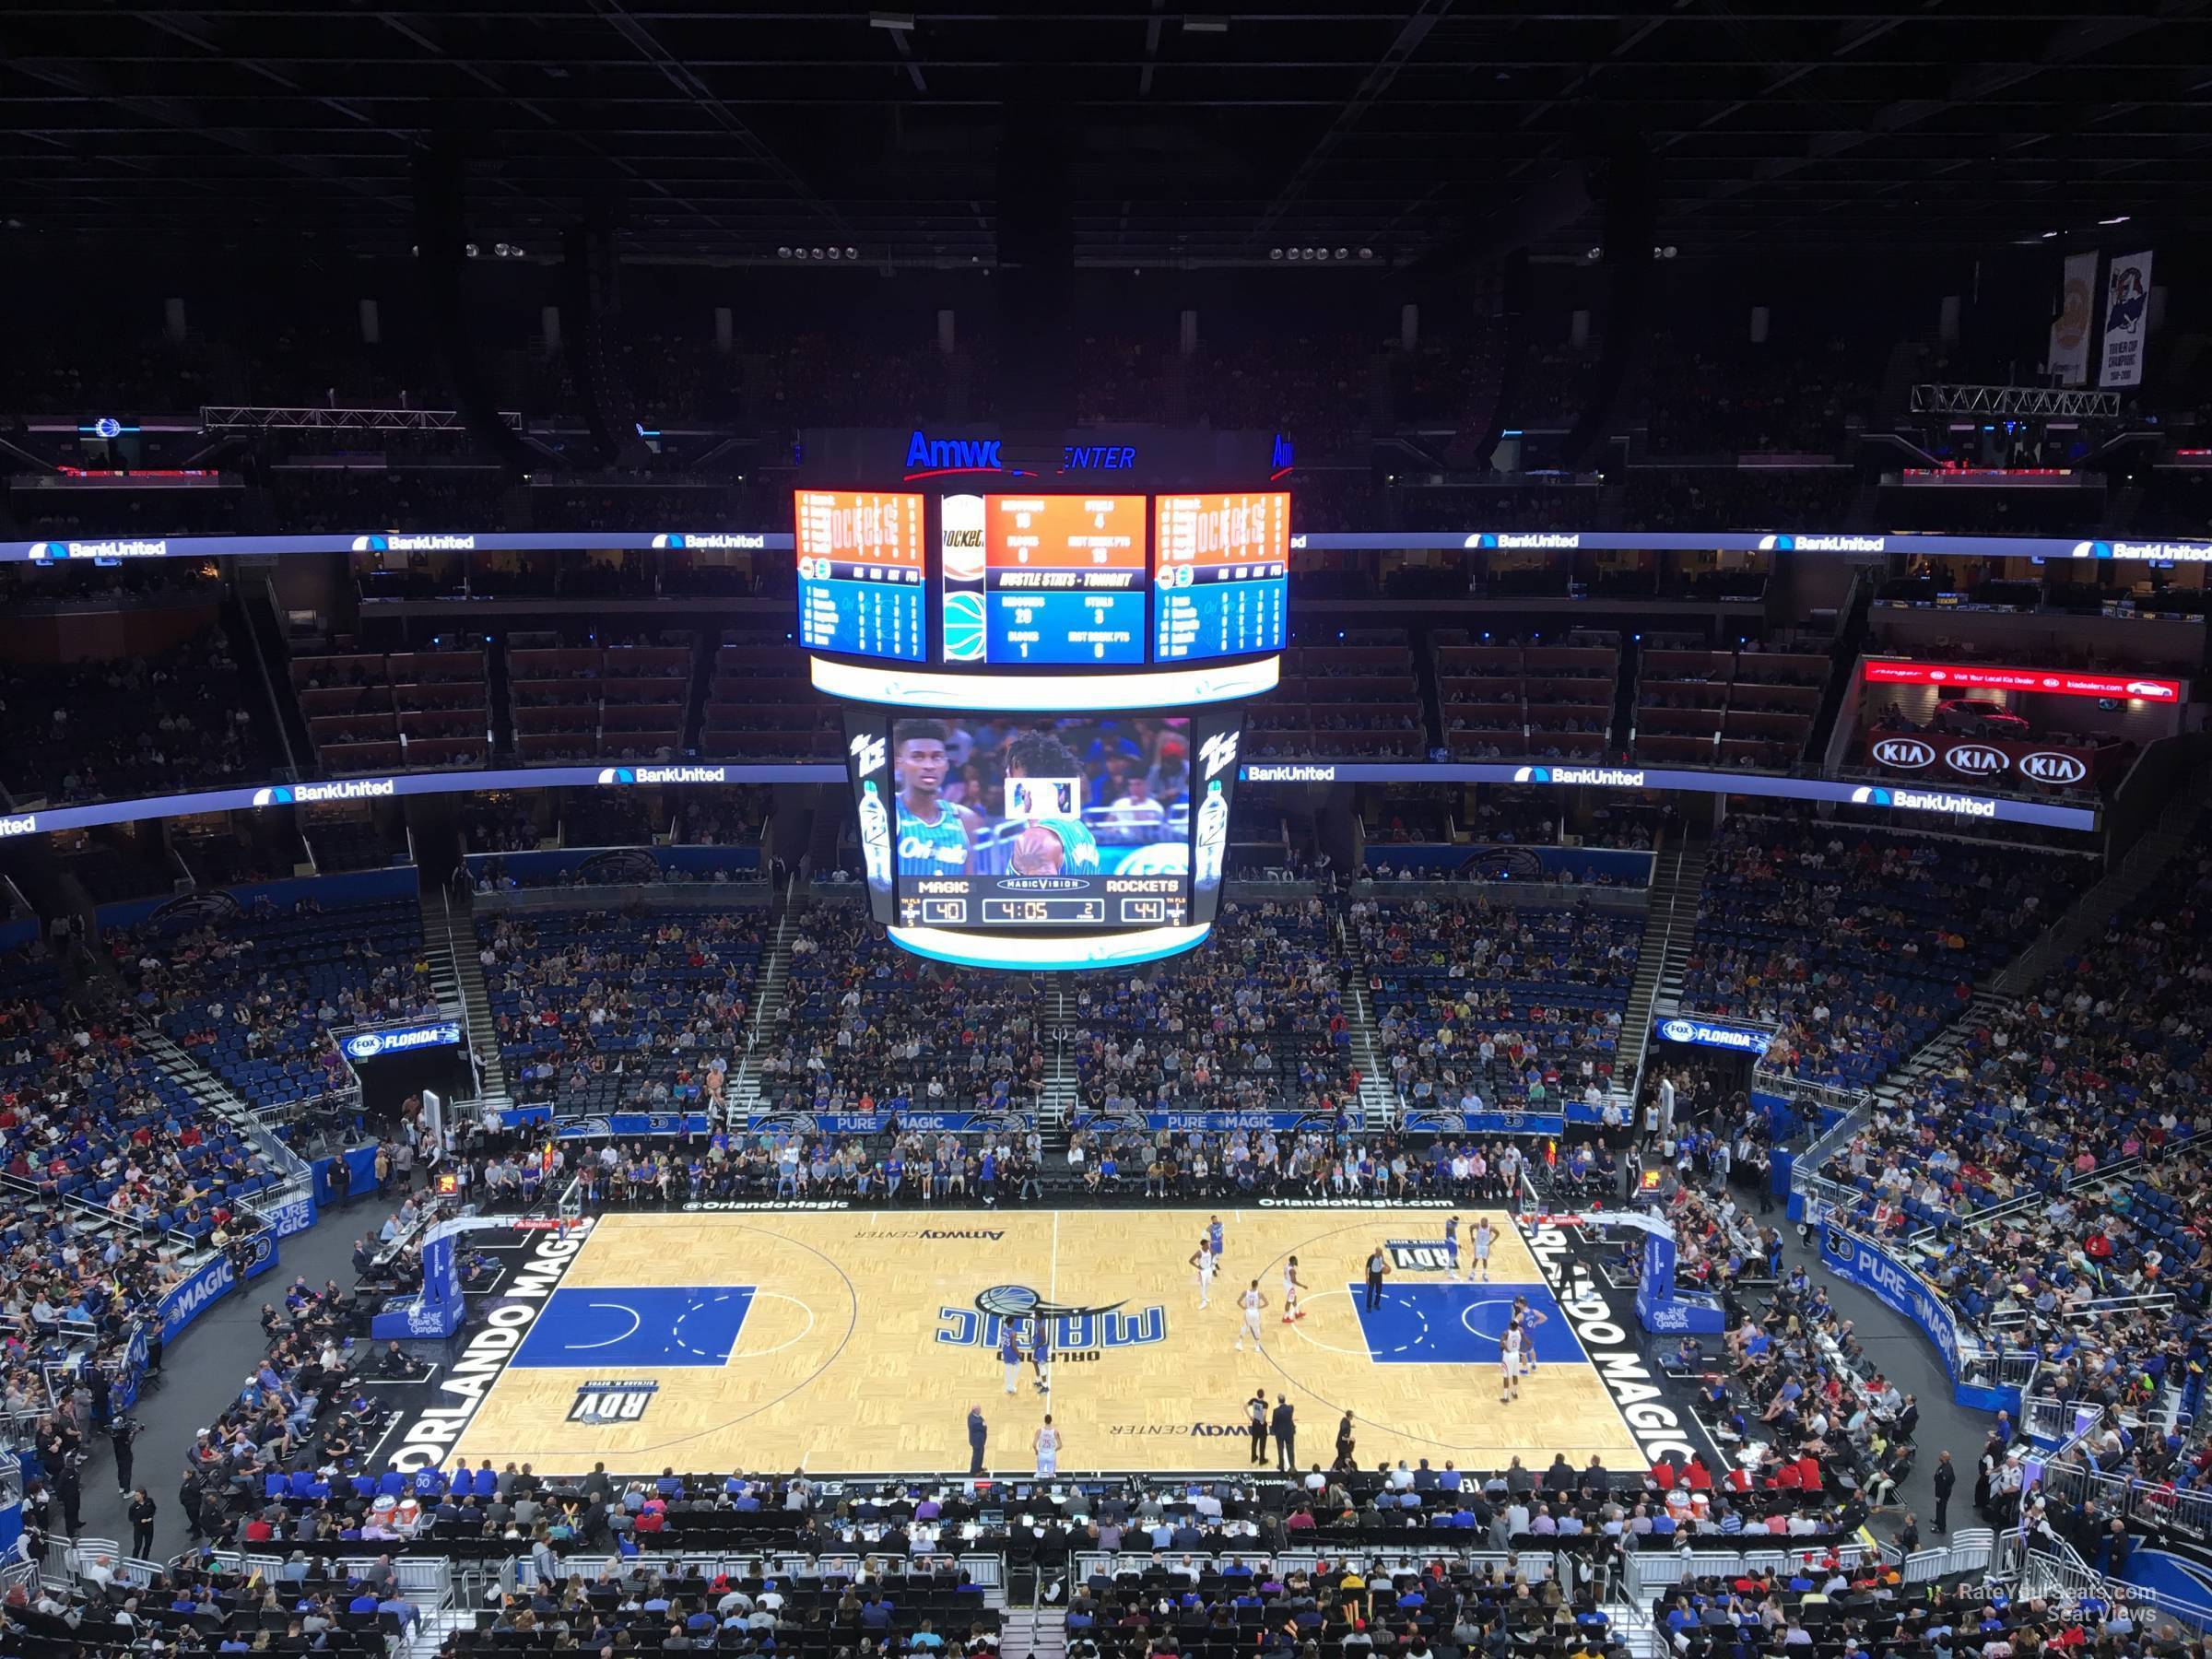 section 209, row 5 seat view  for basketball - amway center